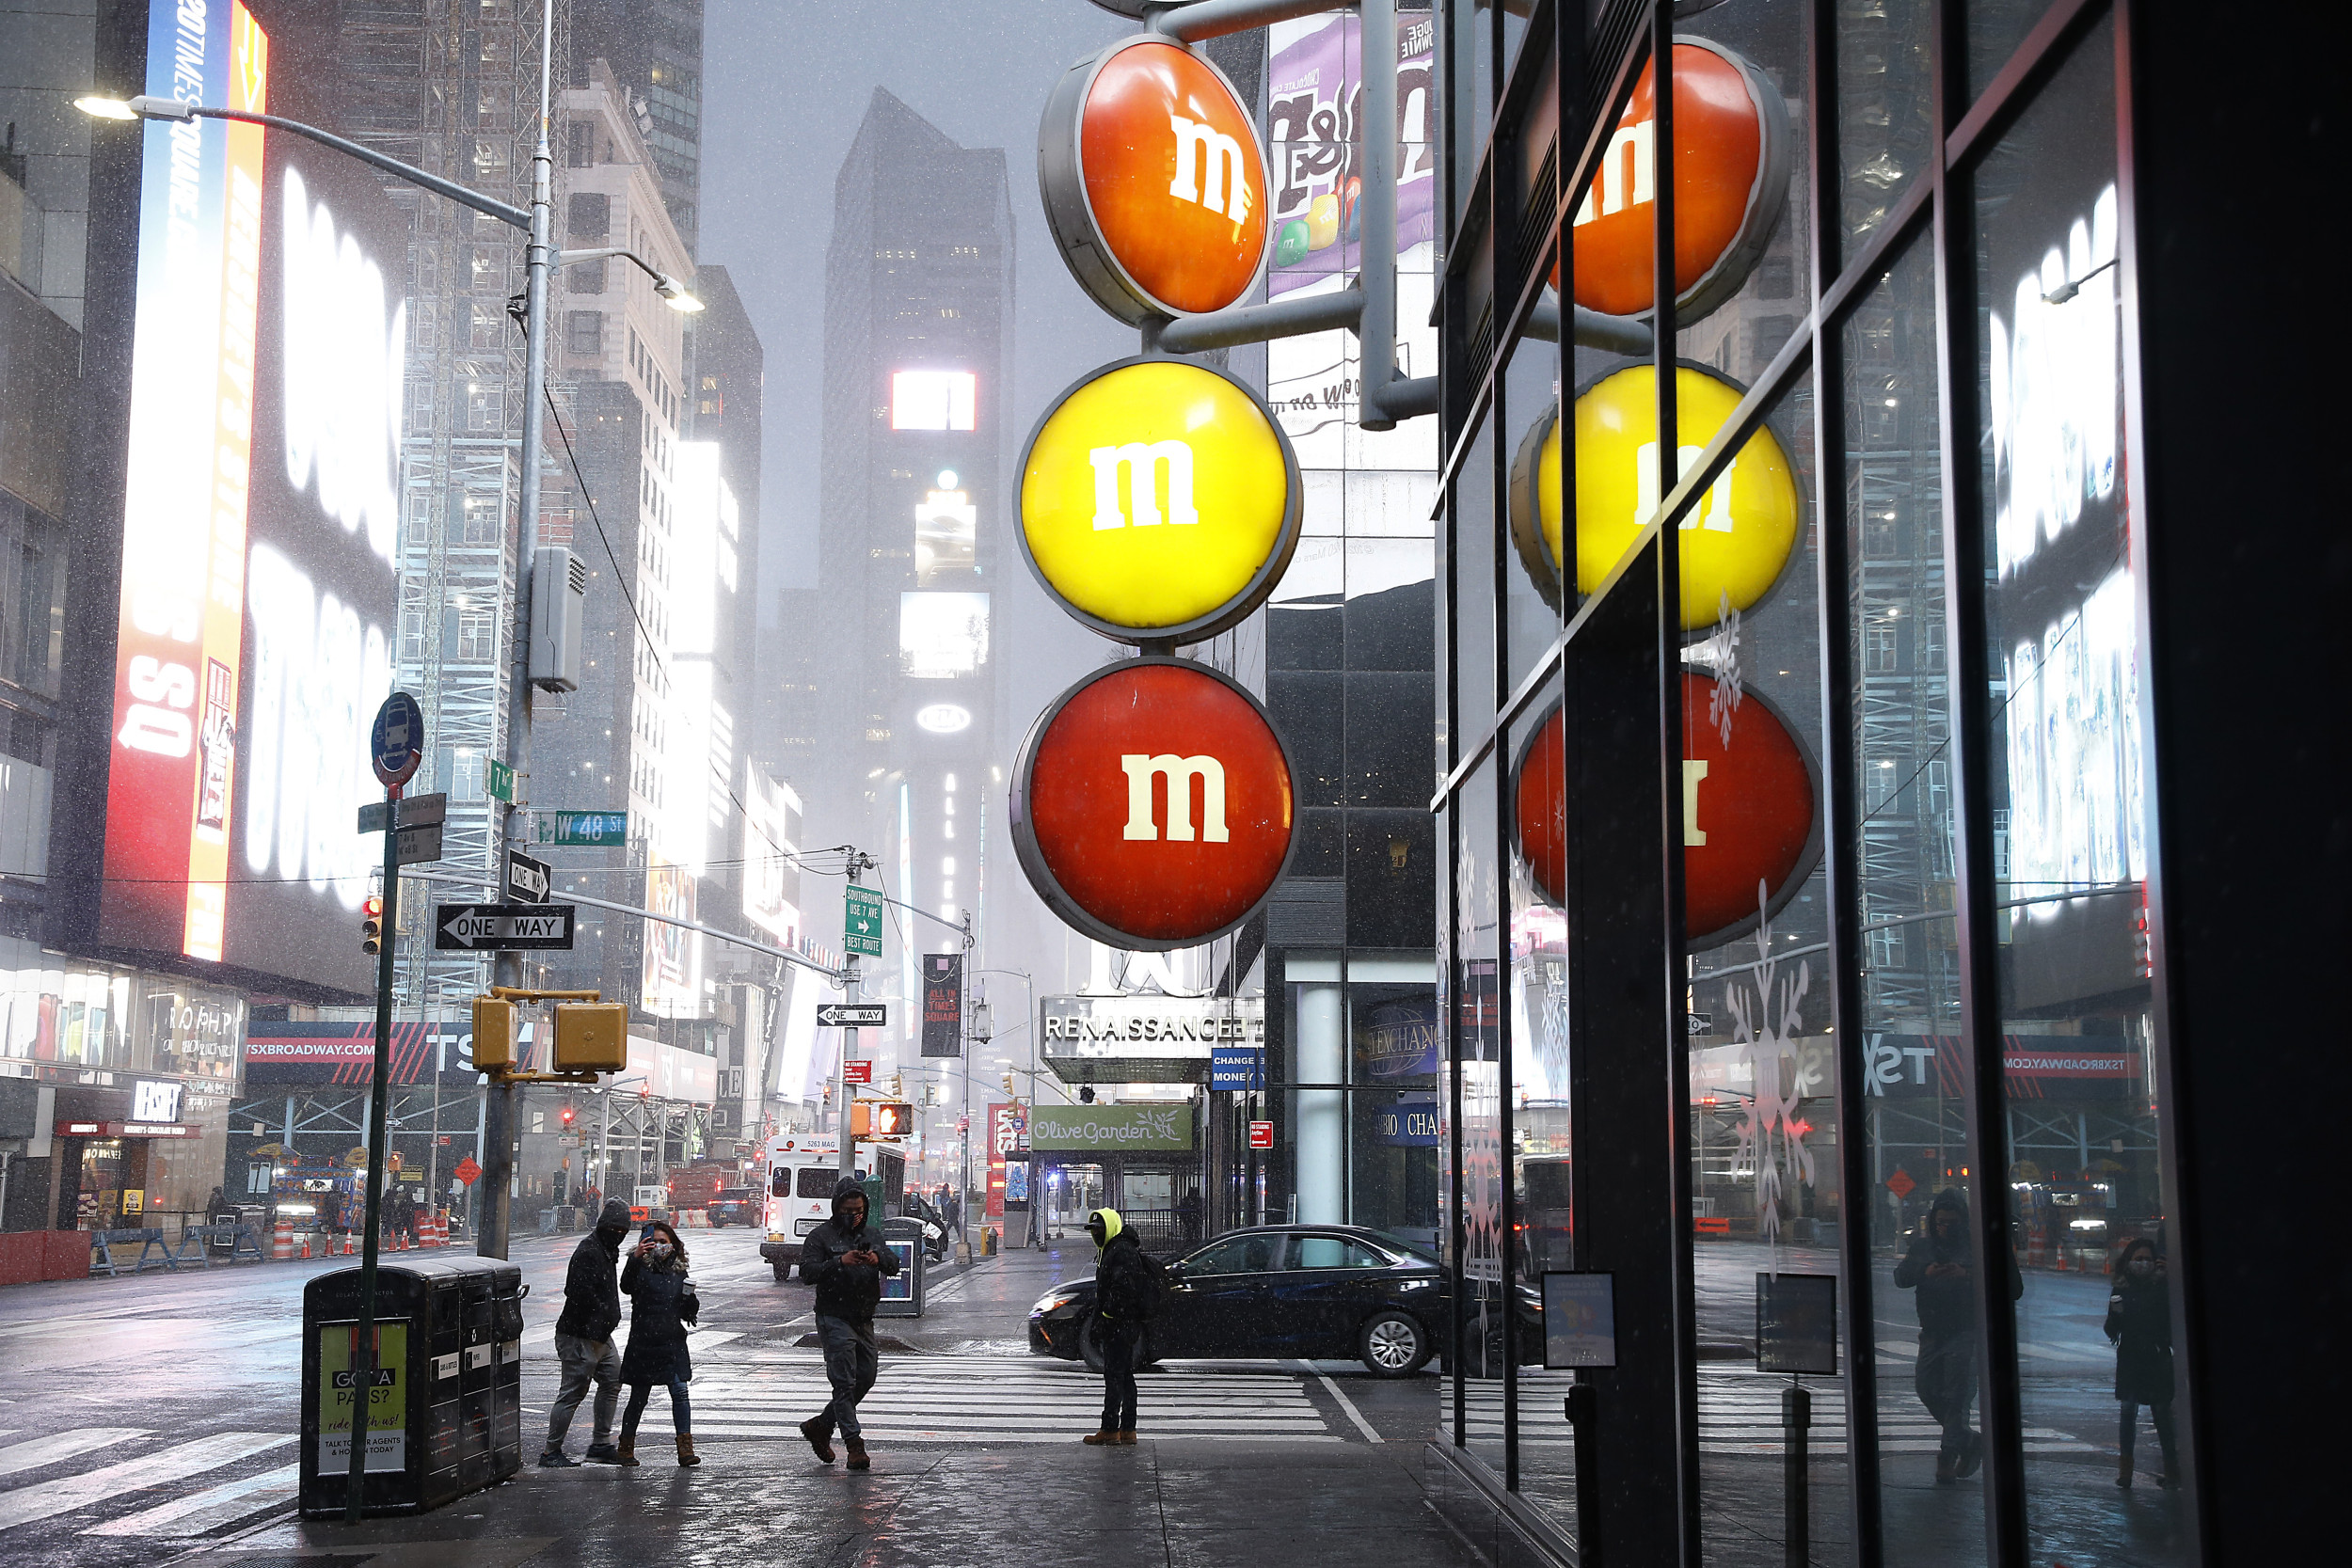 ‘Alpha Male’ Mocked for Demanding All-Male M&M’s: ‘Bizarre Hill to Die On’